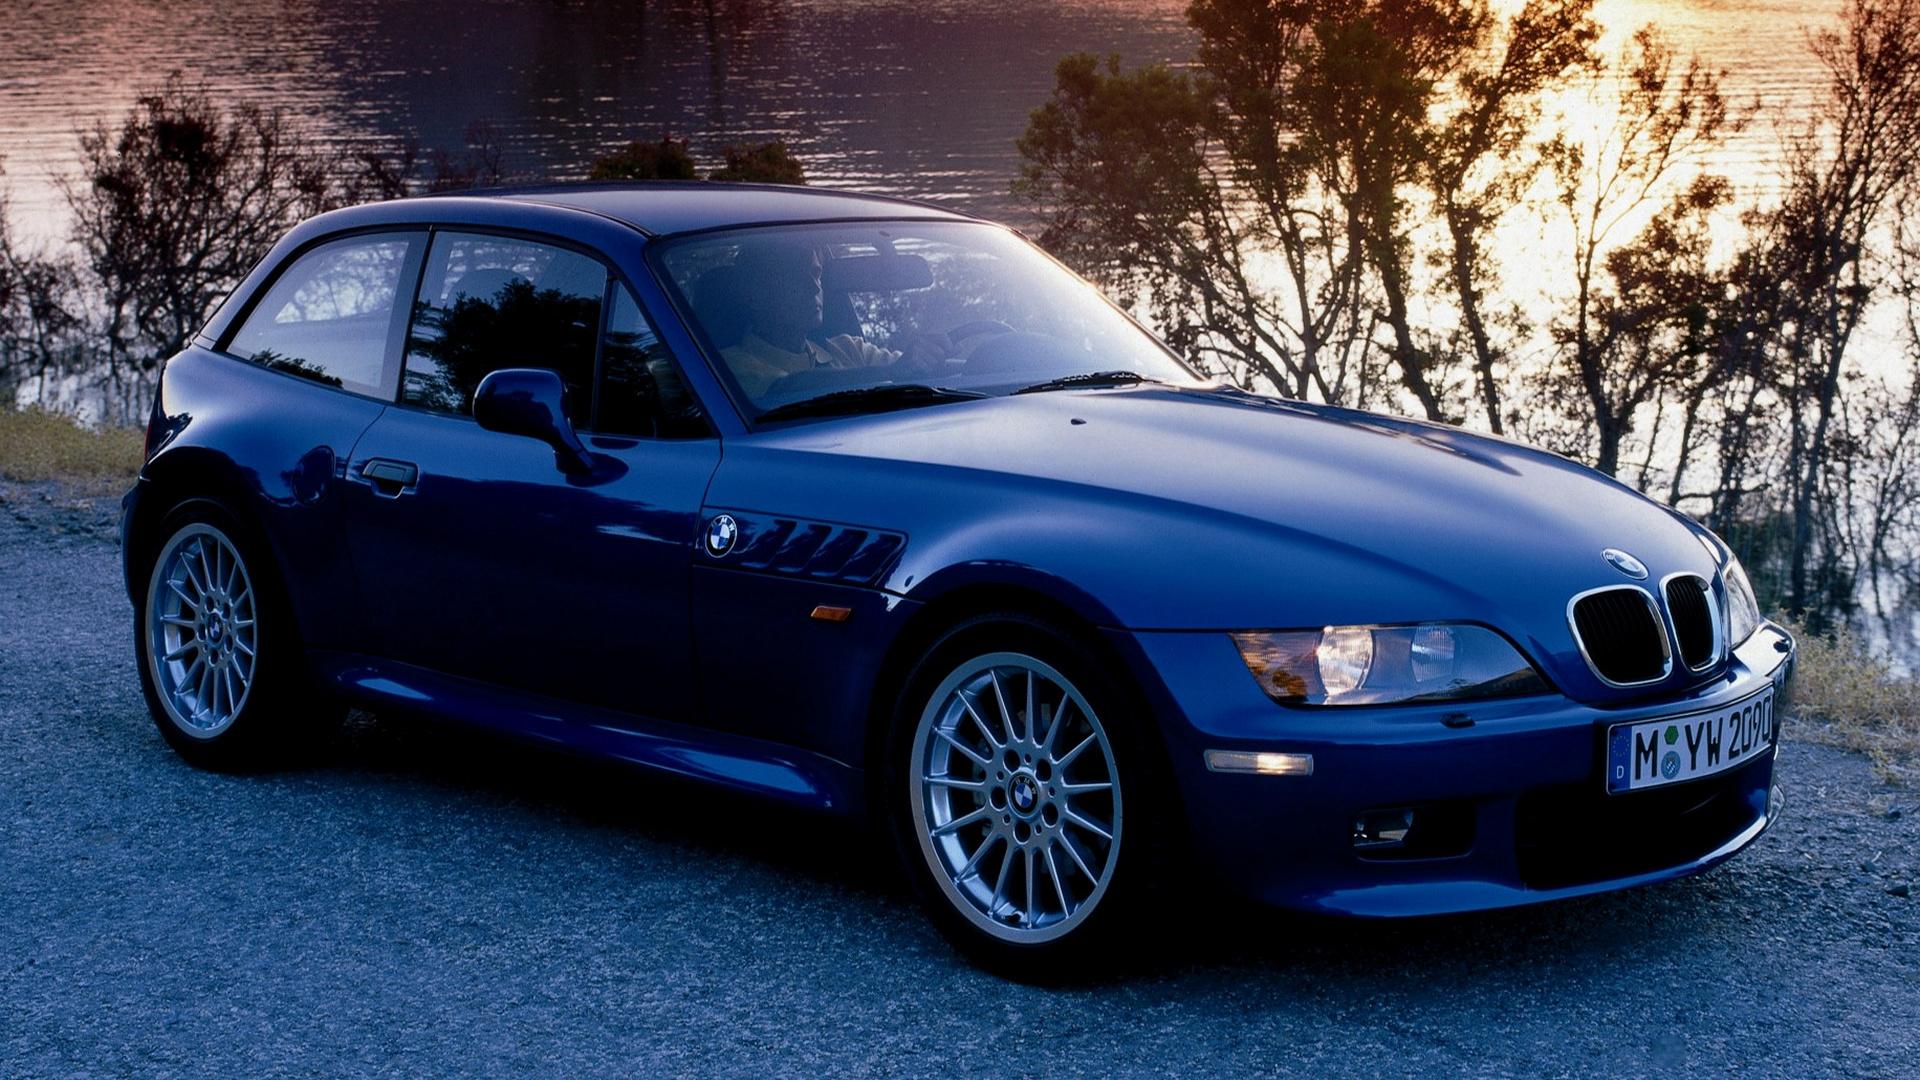 BMW Z3 Coupe and HD Image